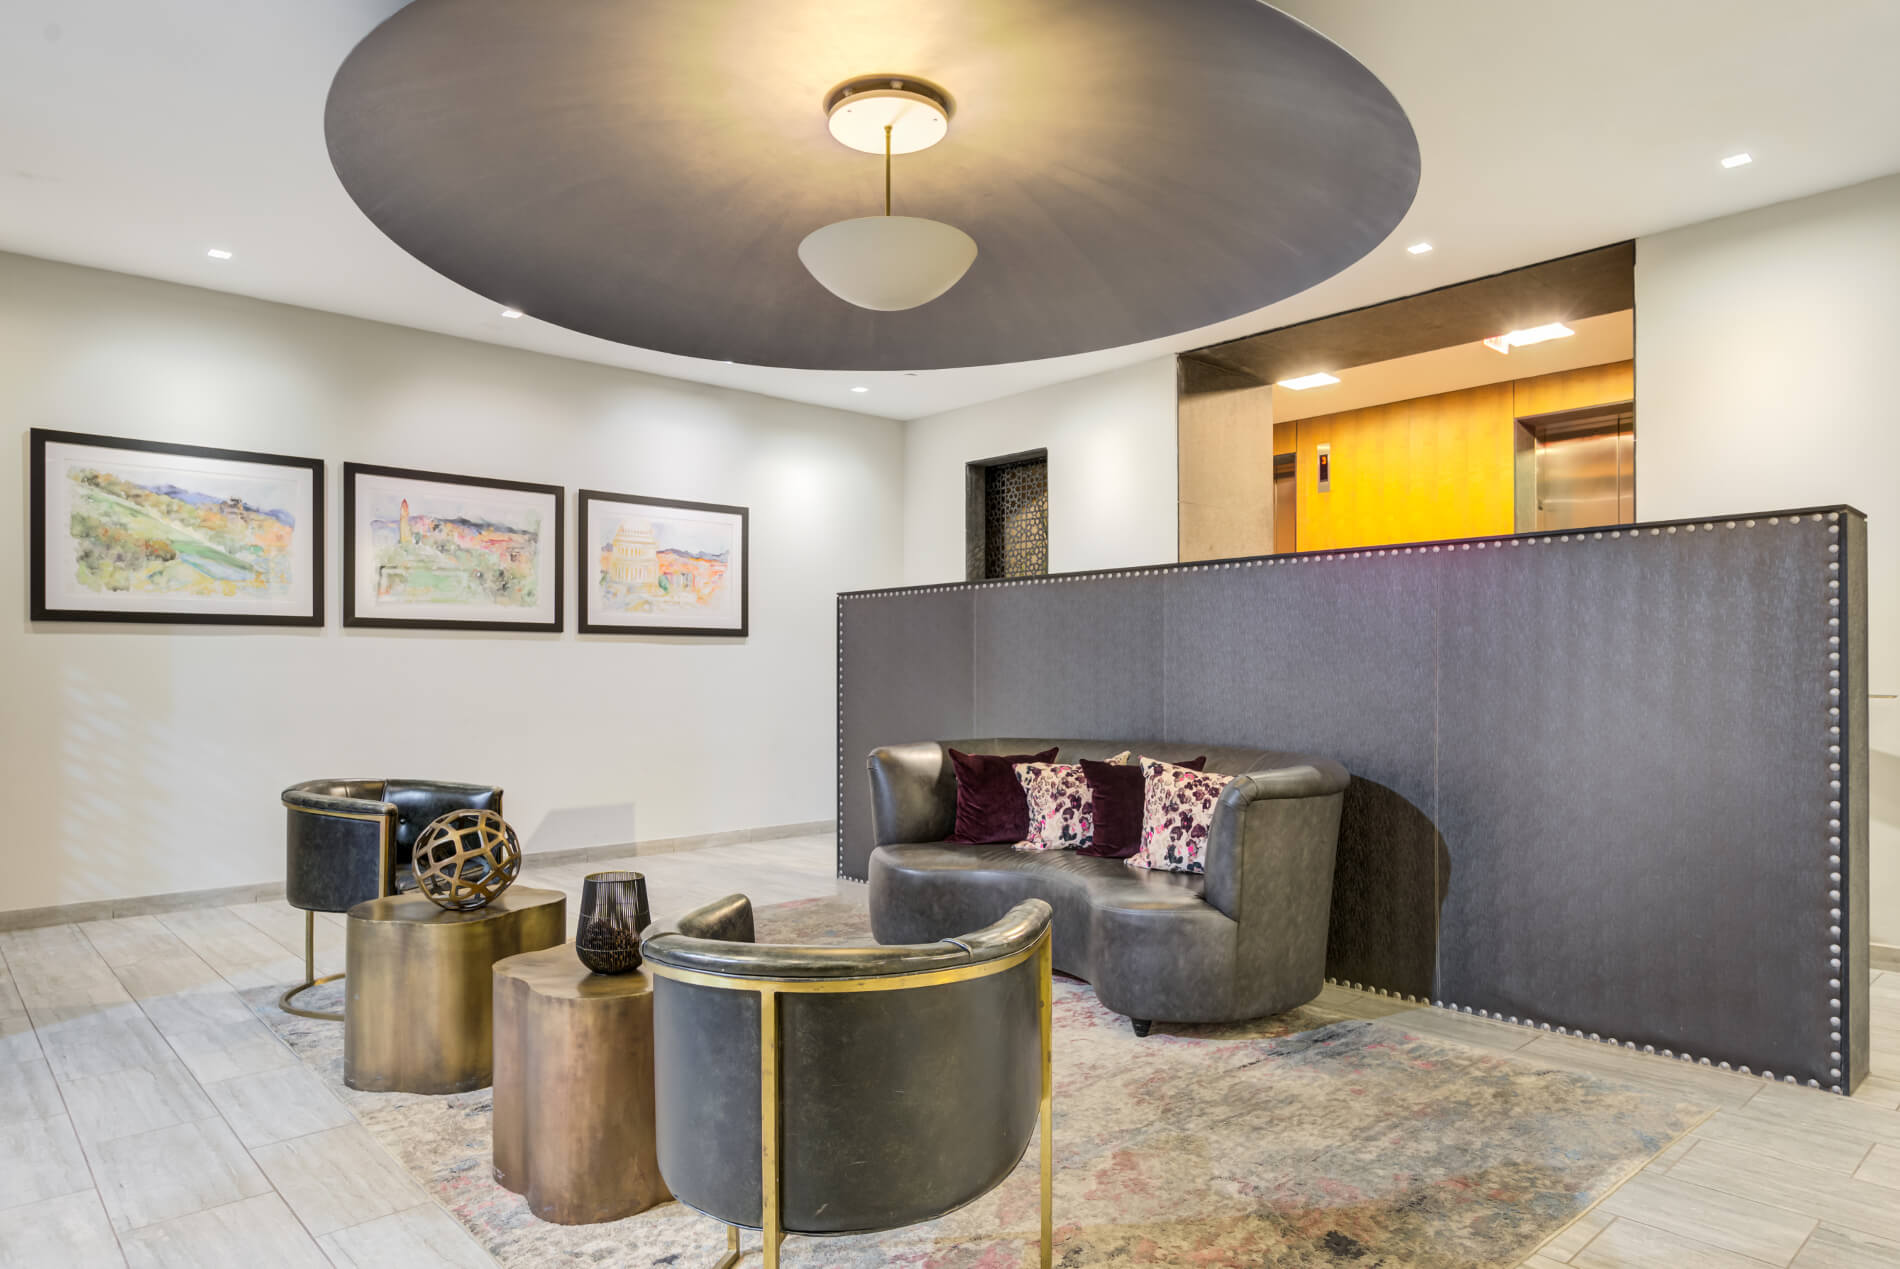 Lobby with furnishings in dramatic geometric and organic shapes